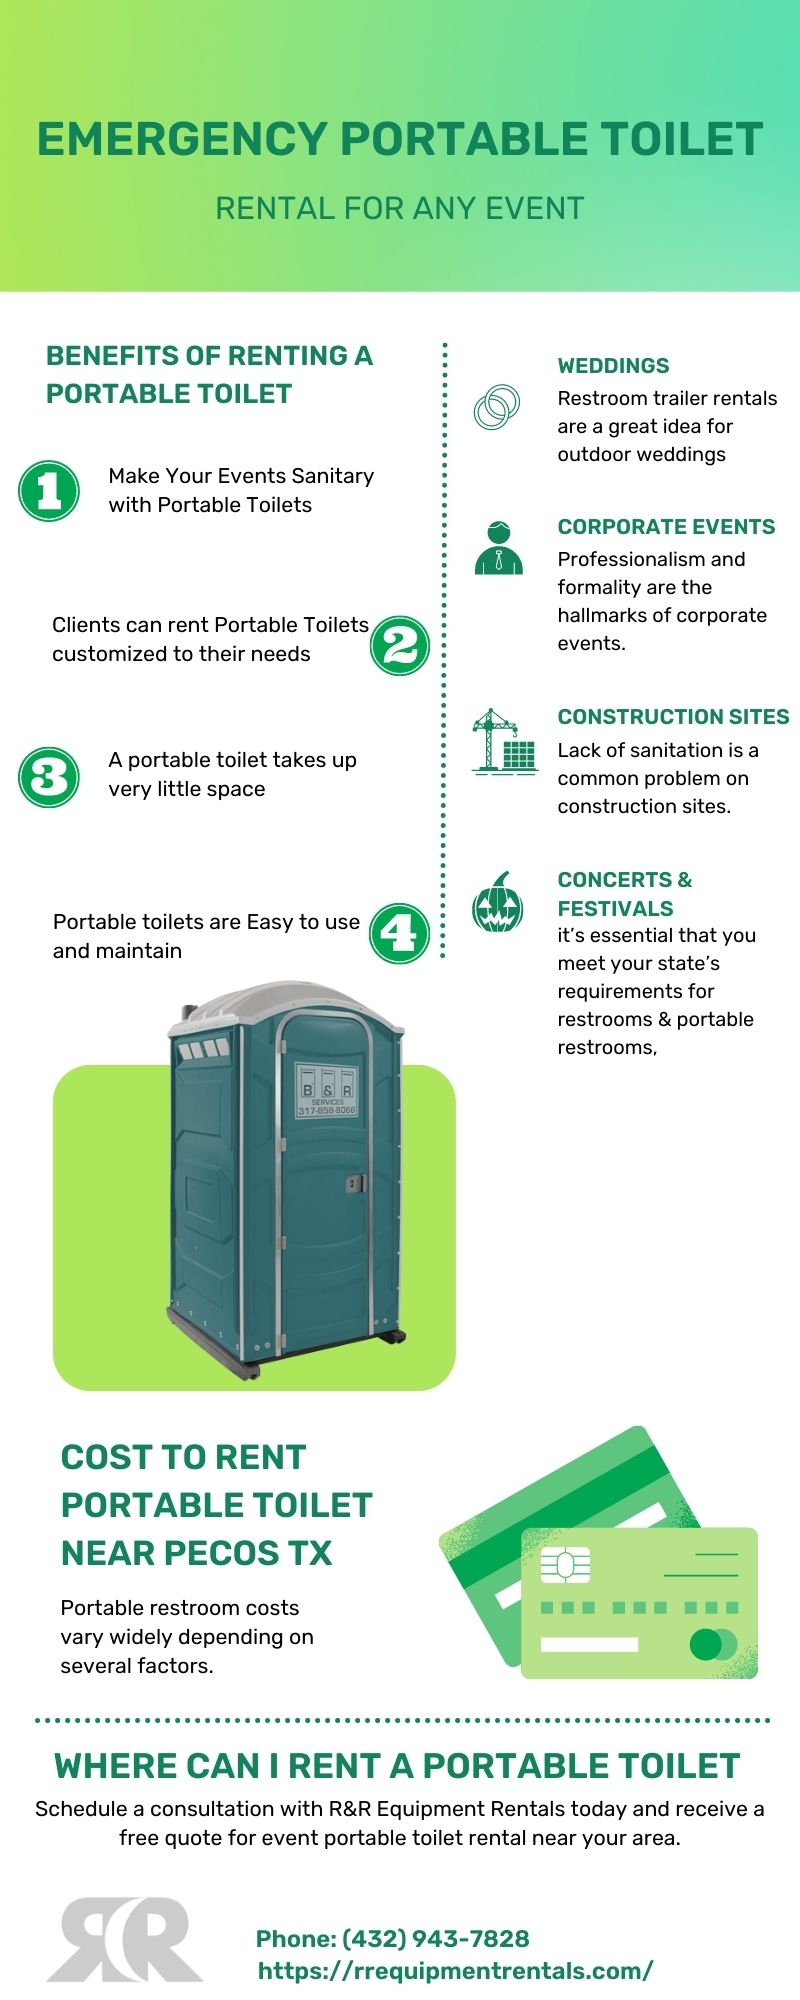 BENEFITS OF RENTING A PORTABLE TOILET